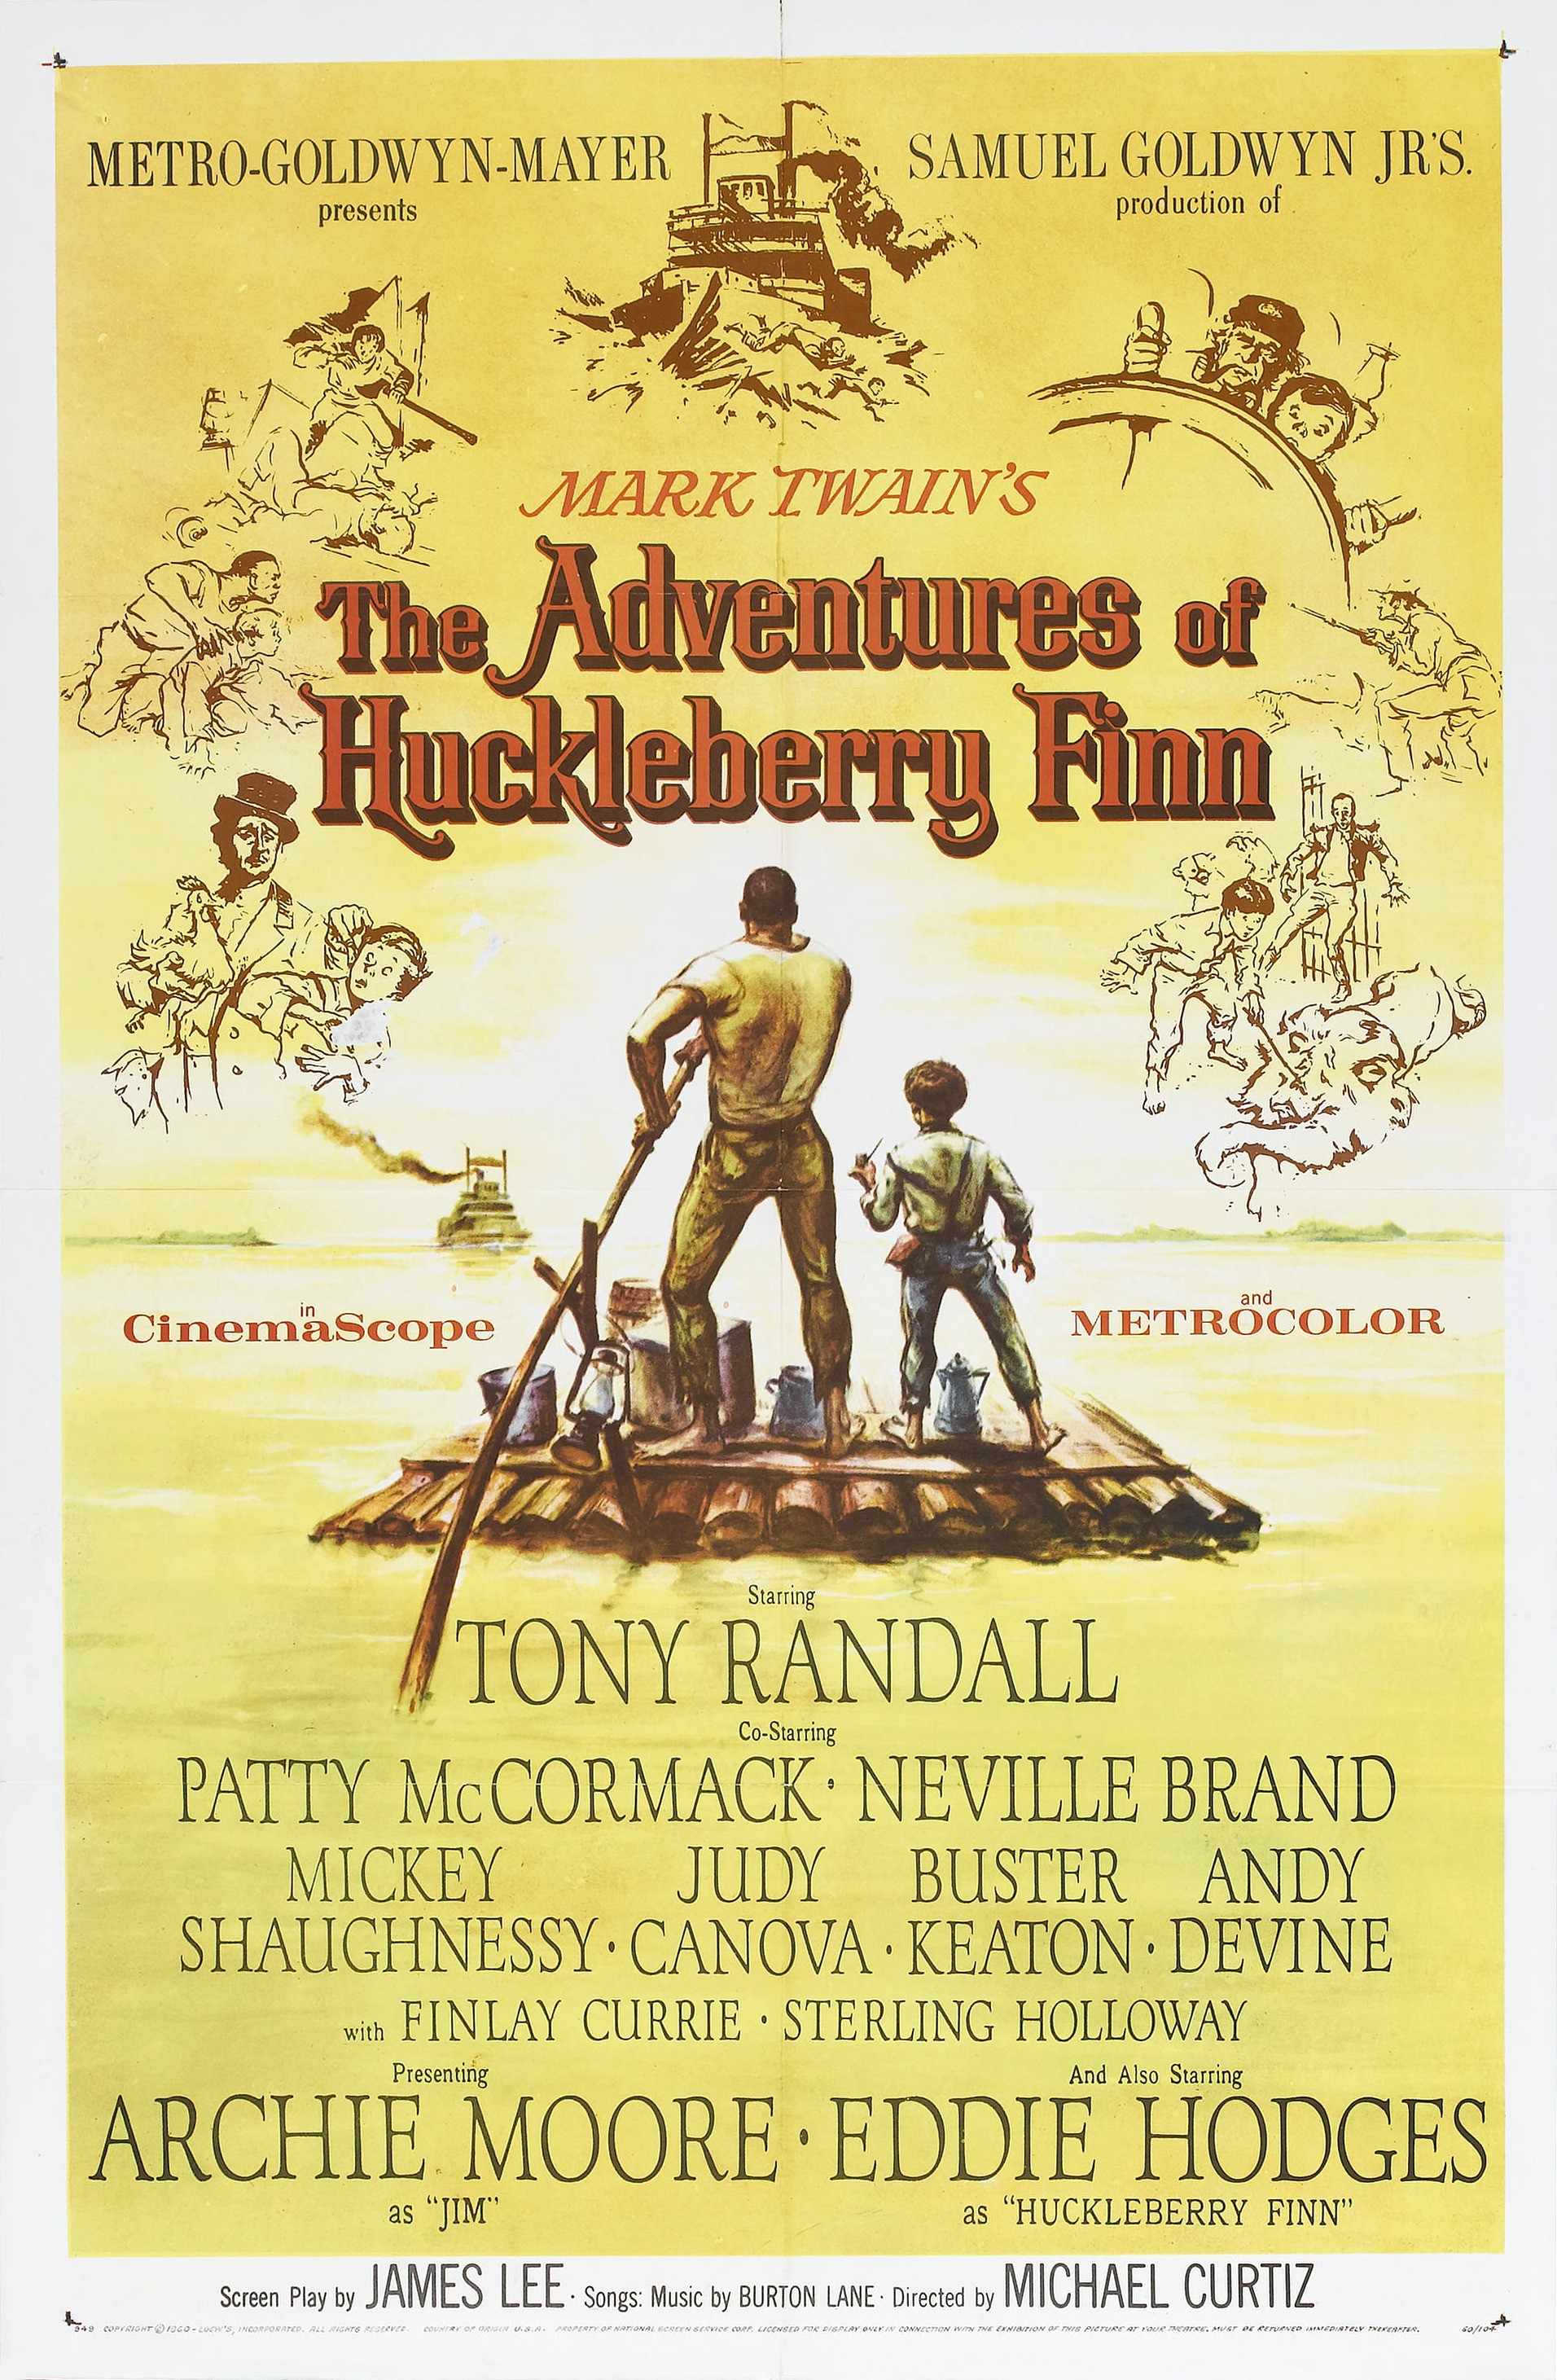 Mega Sized Movie Poster Image for The Adventures of Huckleberry Finn 